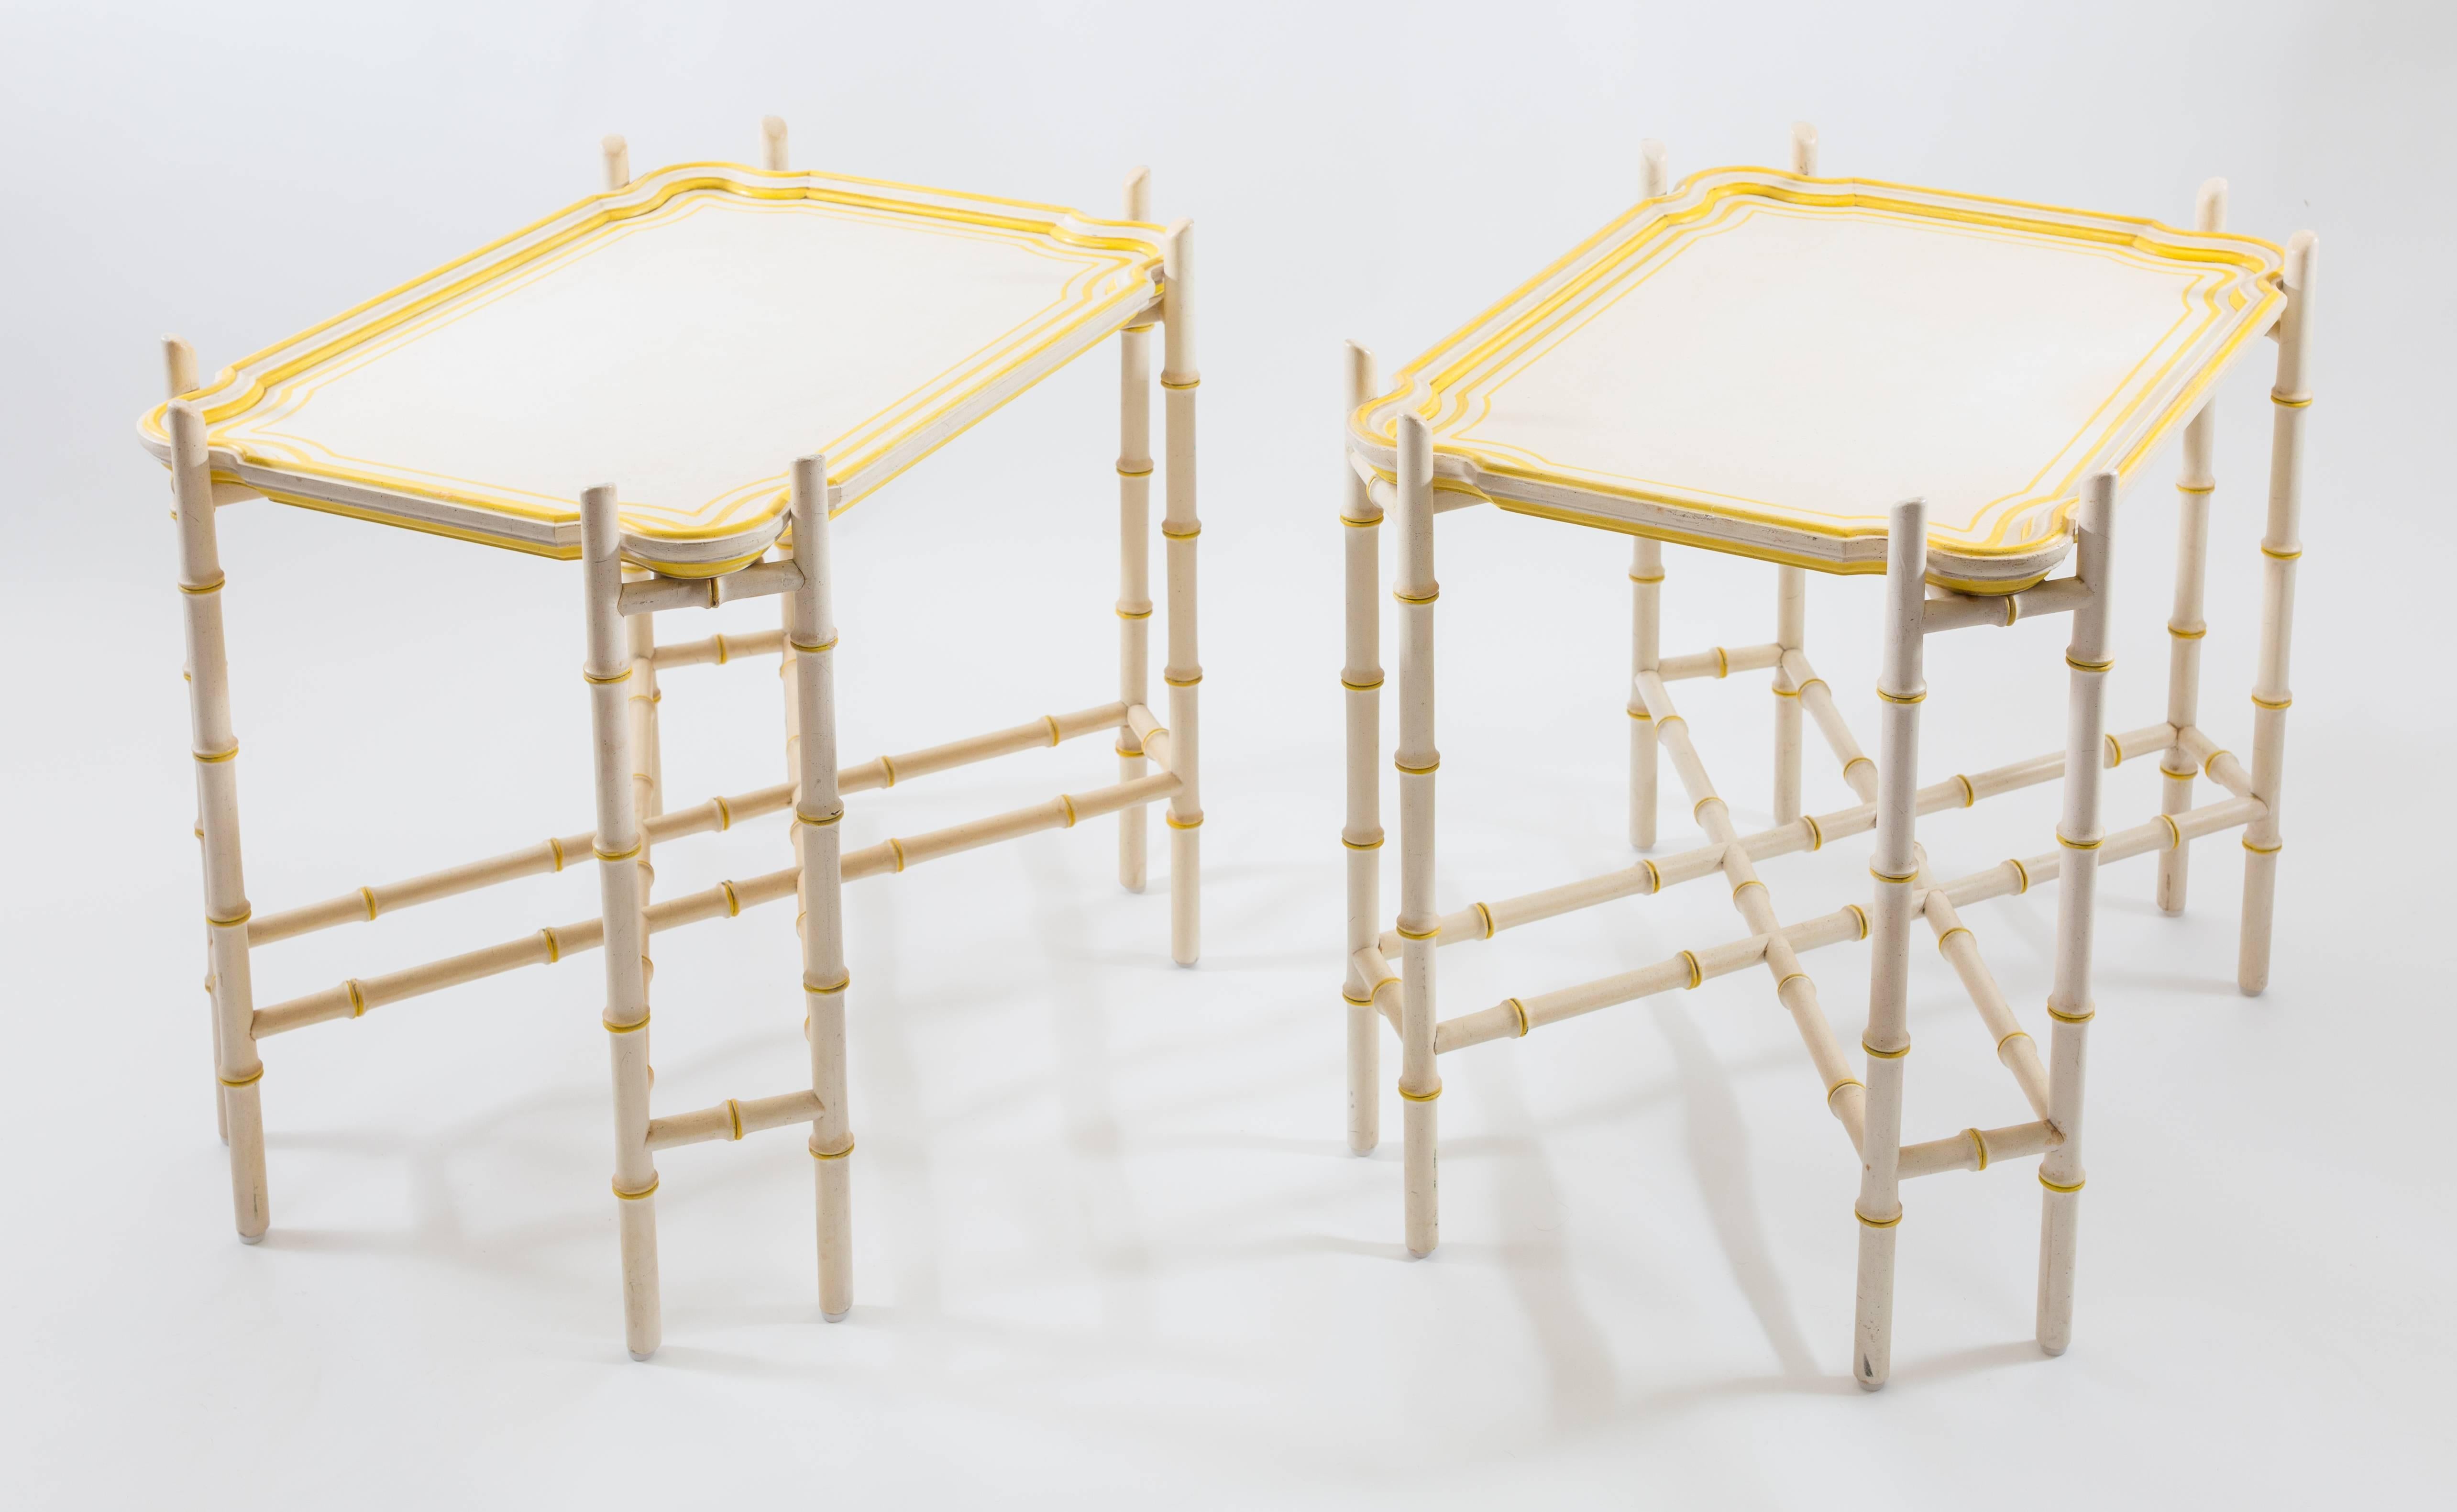 Yellow trimmed removable trays with faux bamboo bases in solid white with yellow trimmed knotches. Although tray tables, they are very sturdy. The base does not fold up which makes the surface quite solid.